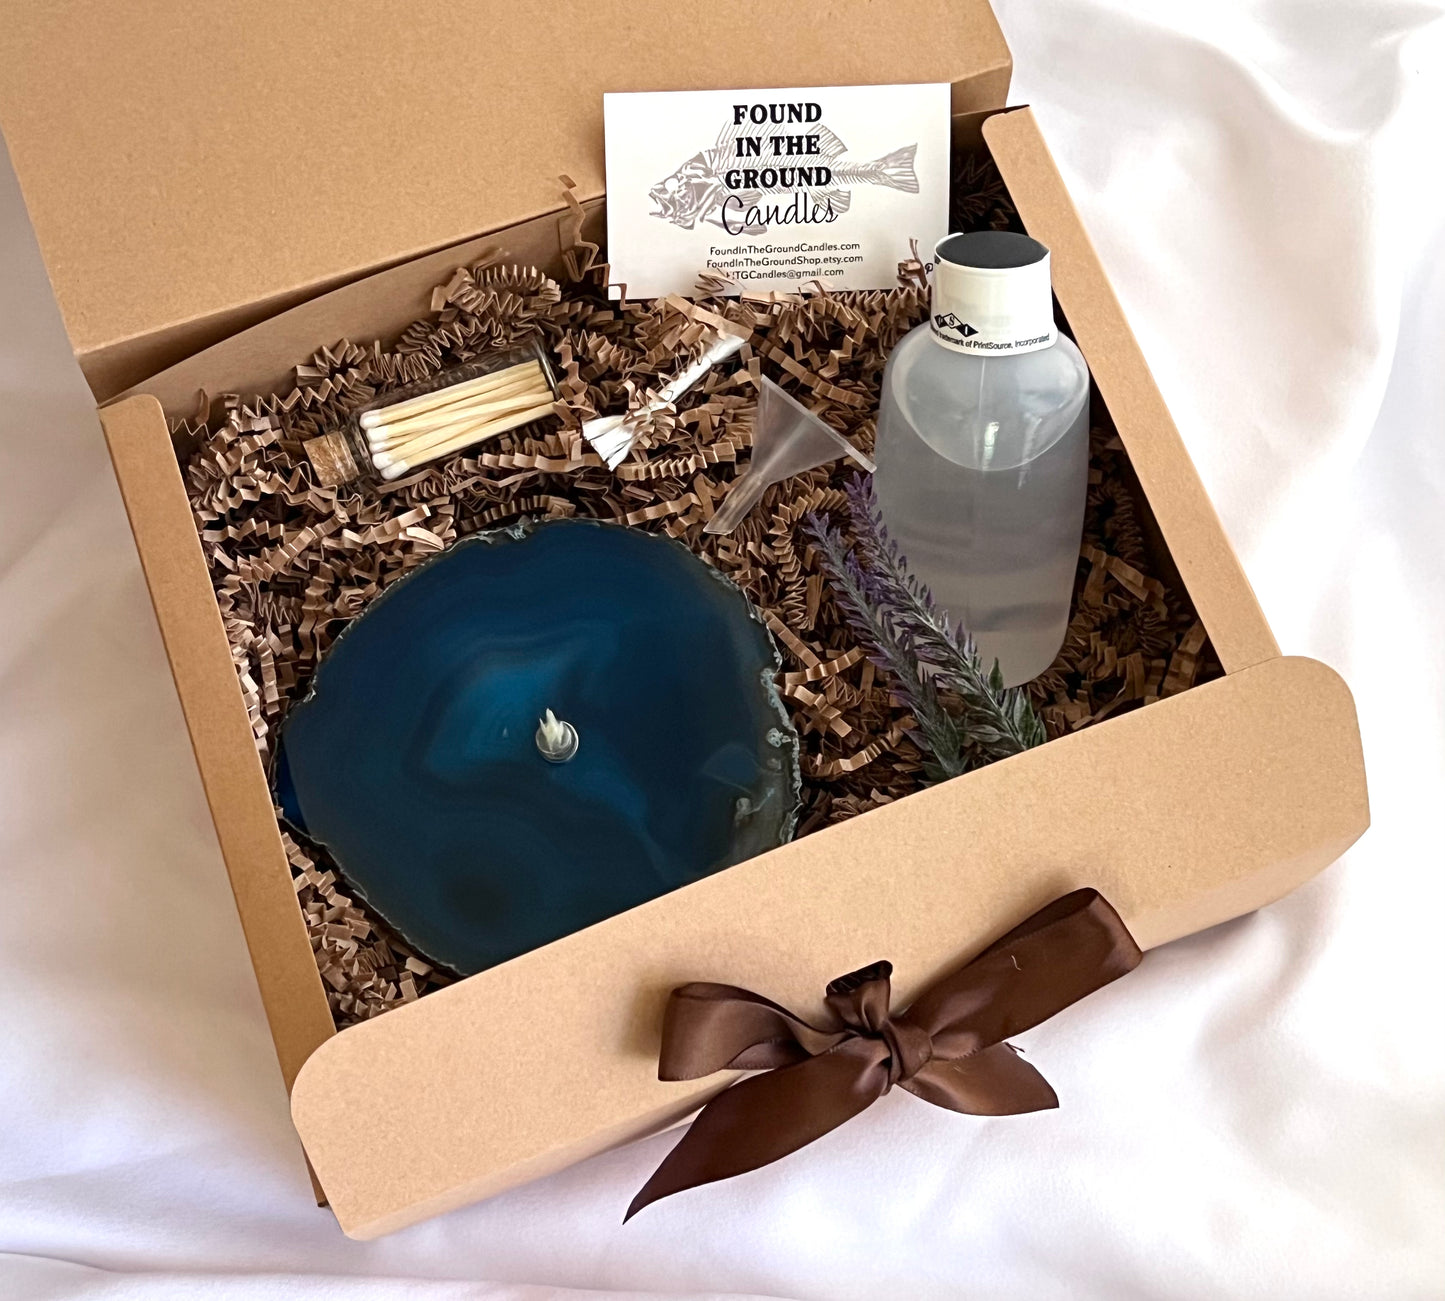 Teal Agate Rock Oil Candle Gift Box - Found In The Ground Candles